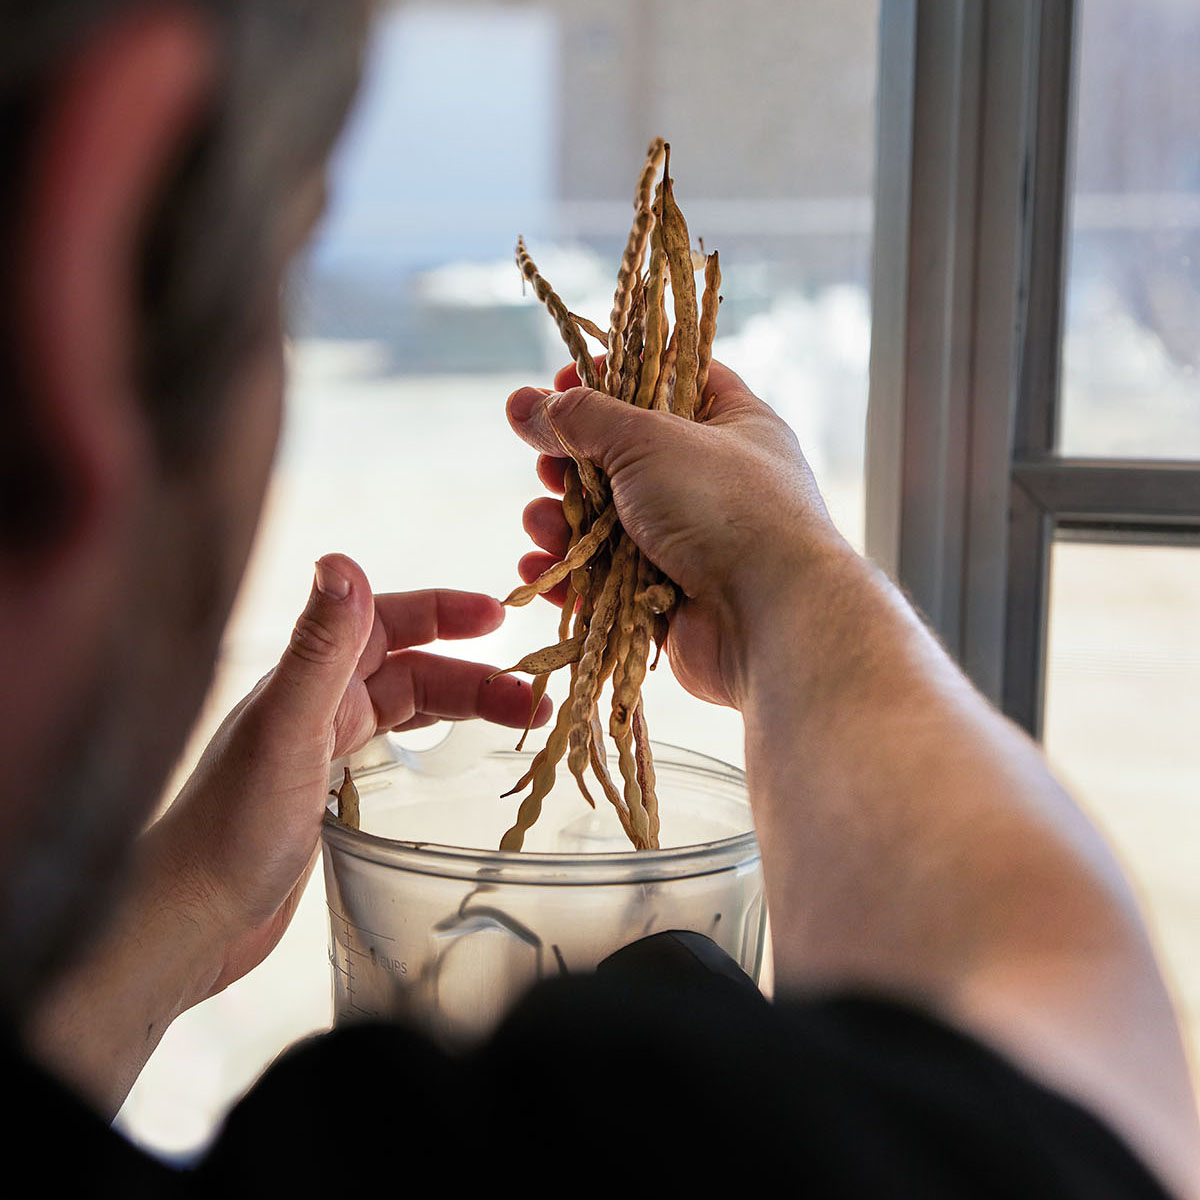 A person places mesquite pods in a glass jar